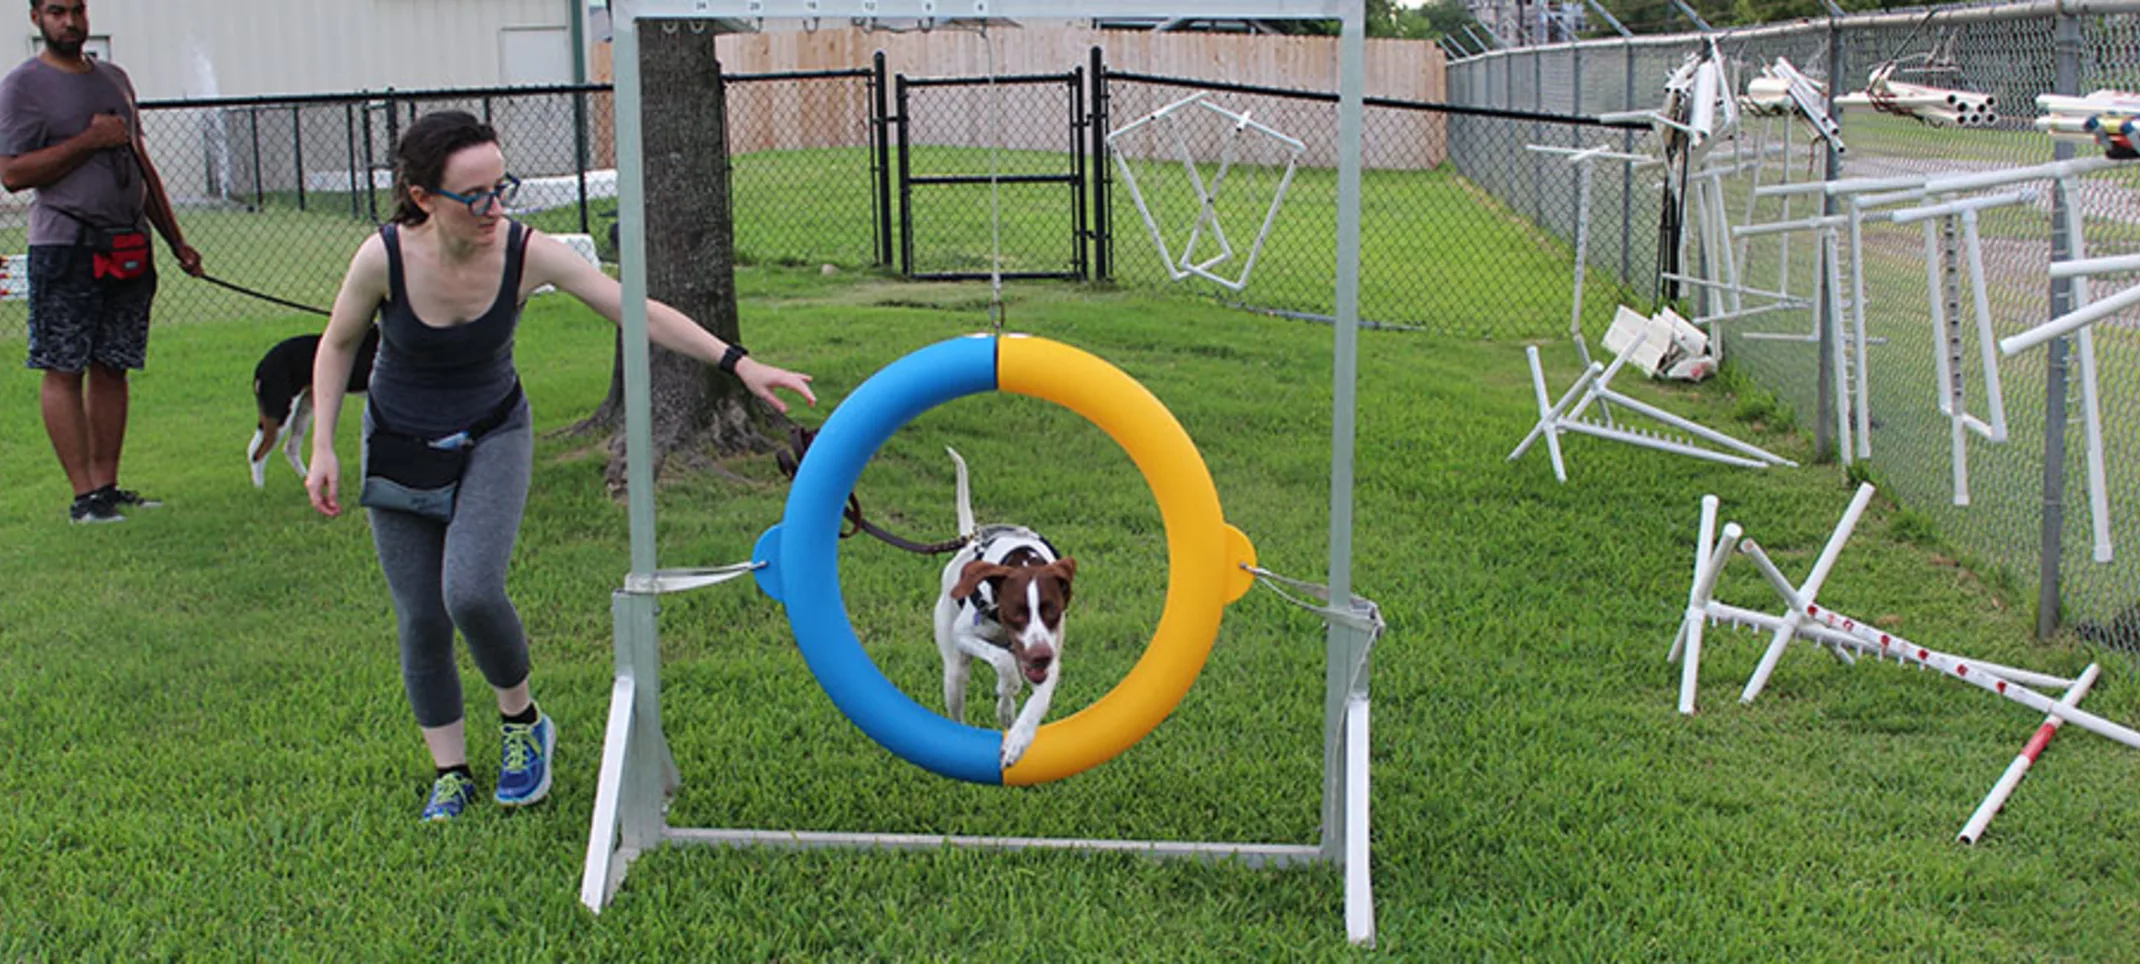 Dog jumping through hoop with trainer